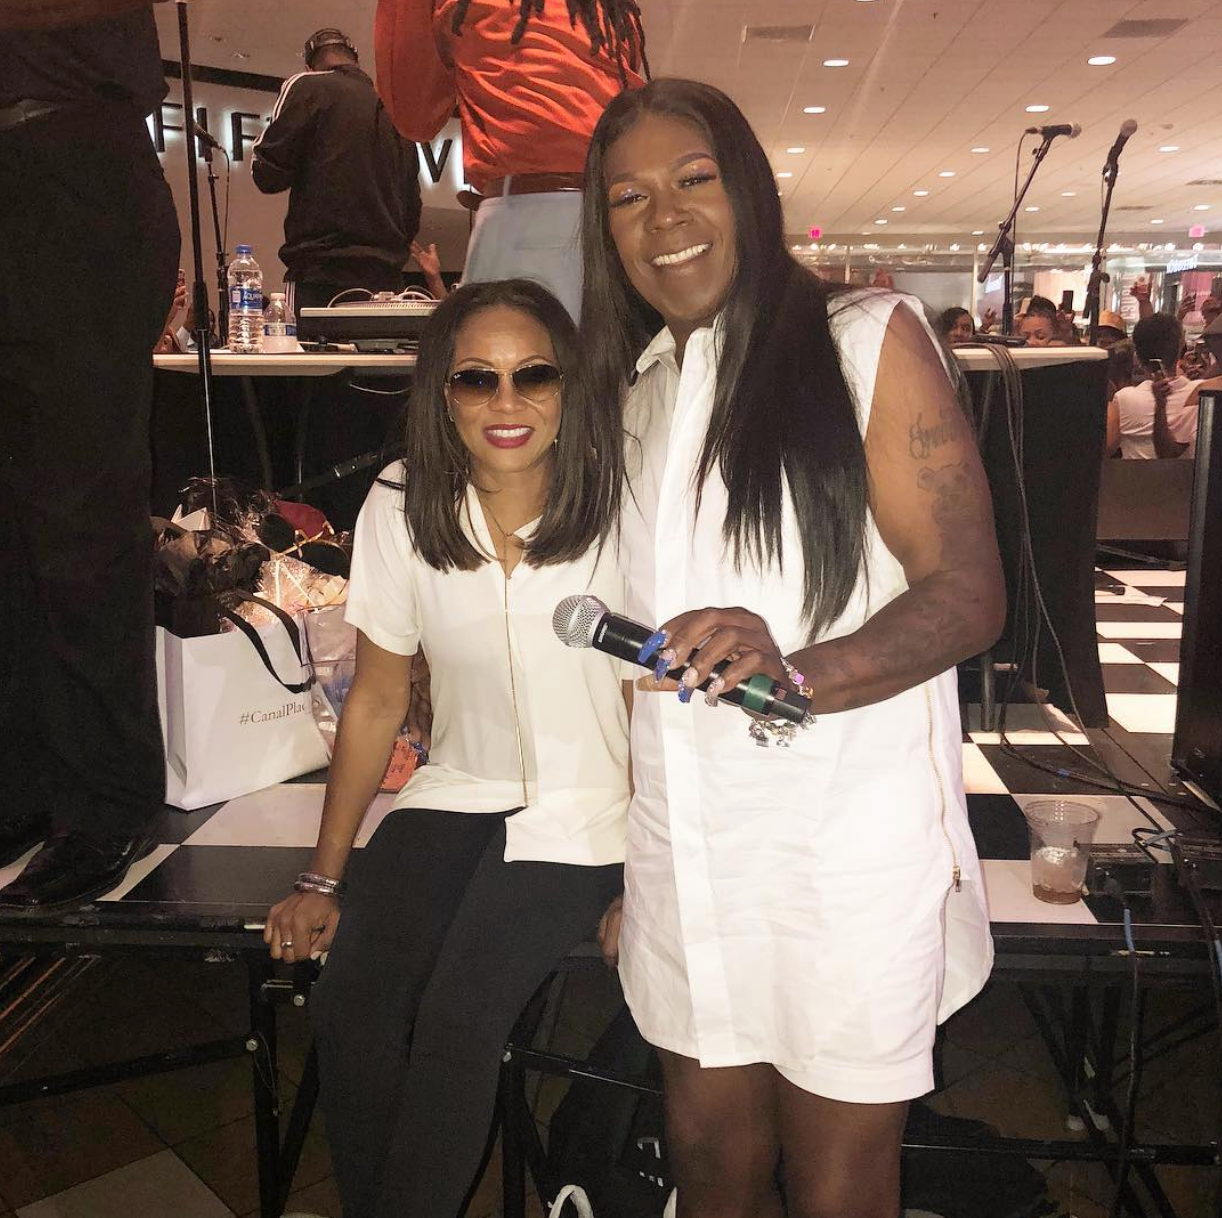 Warning! These Instagram Pics From ESSENCE Fest May Give You Intense FOMO
